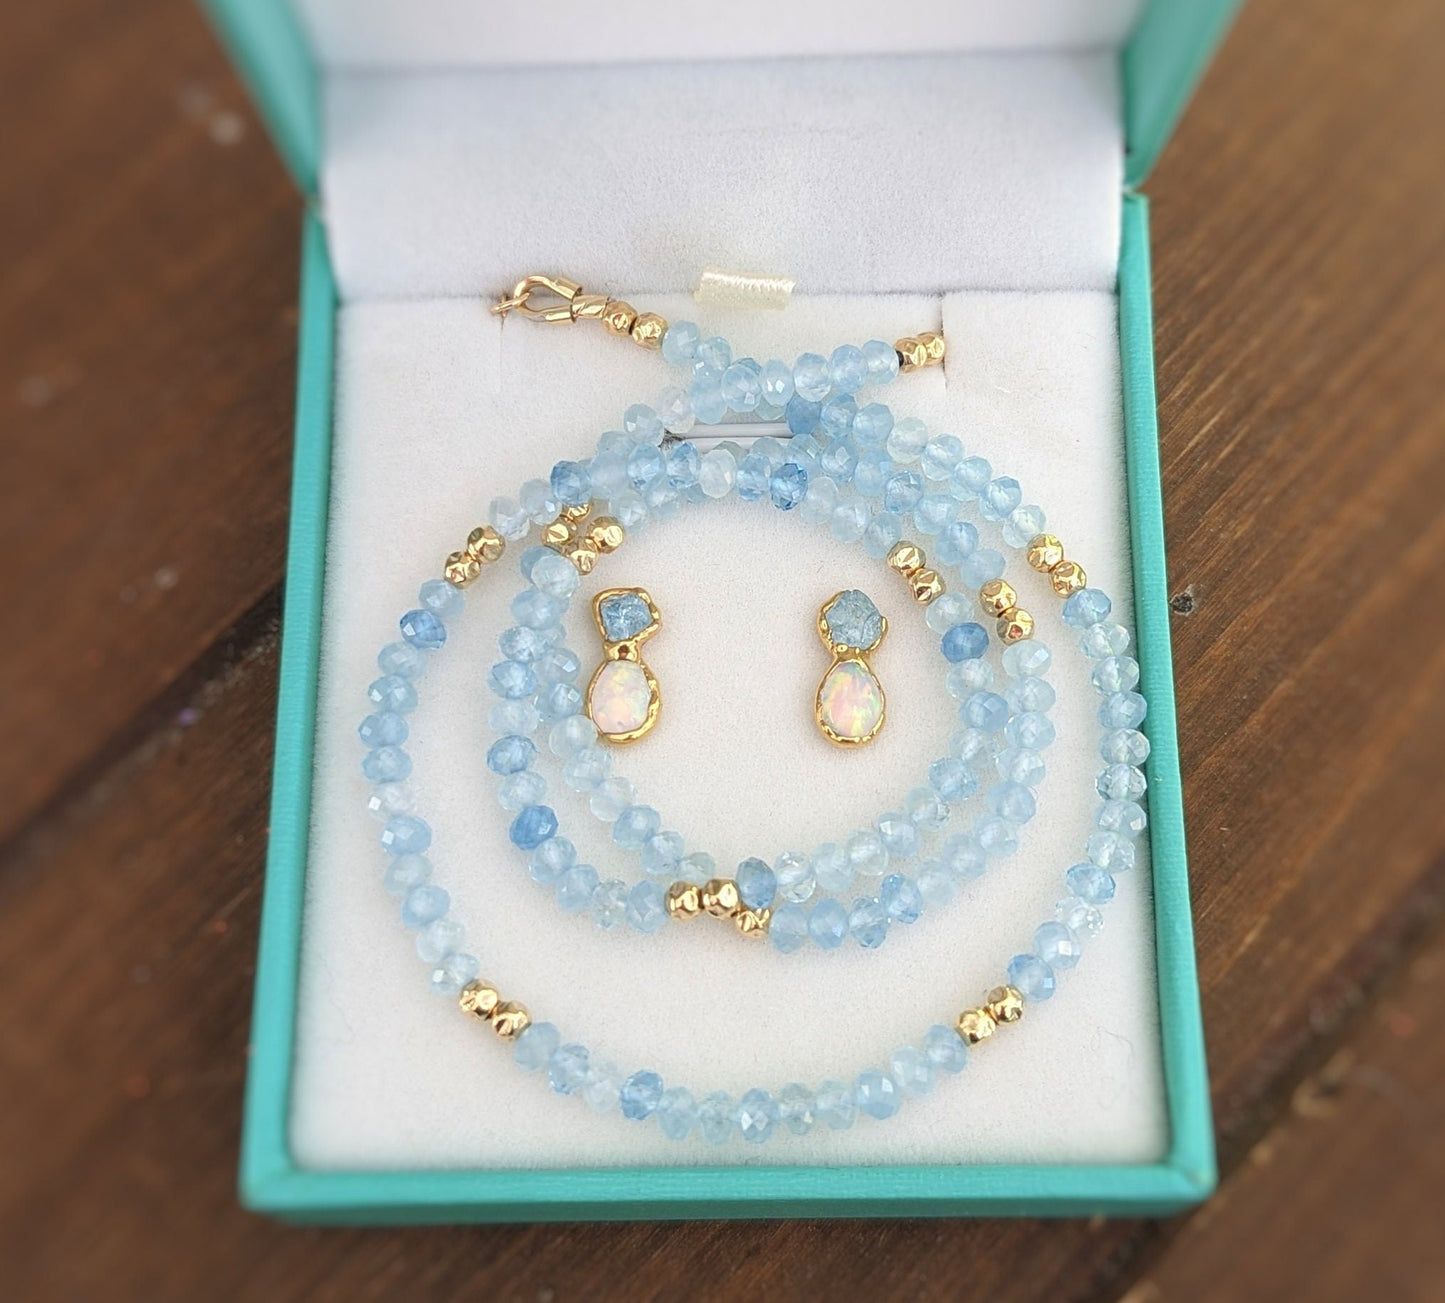 Aquamarine and Australian Opal Stud Earrings and beaded Necklace Bridal uniquely set in 18k Gold